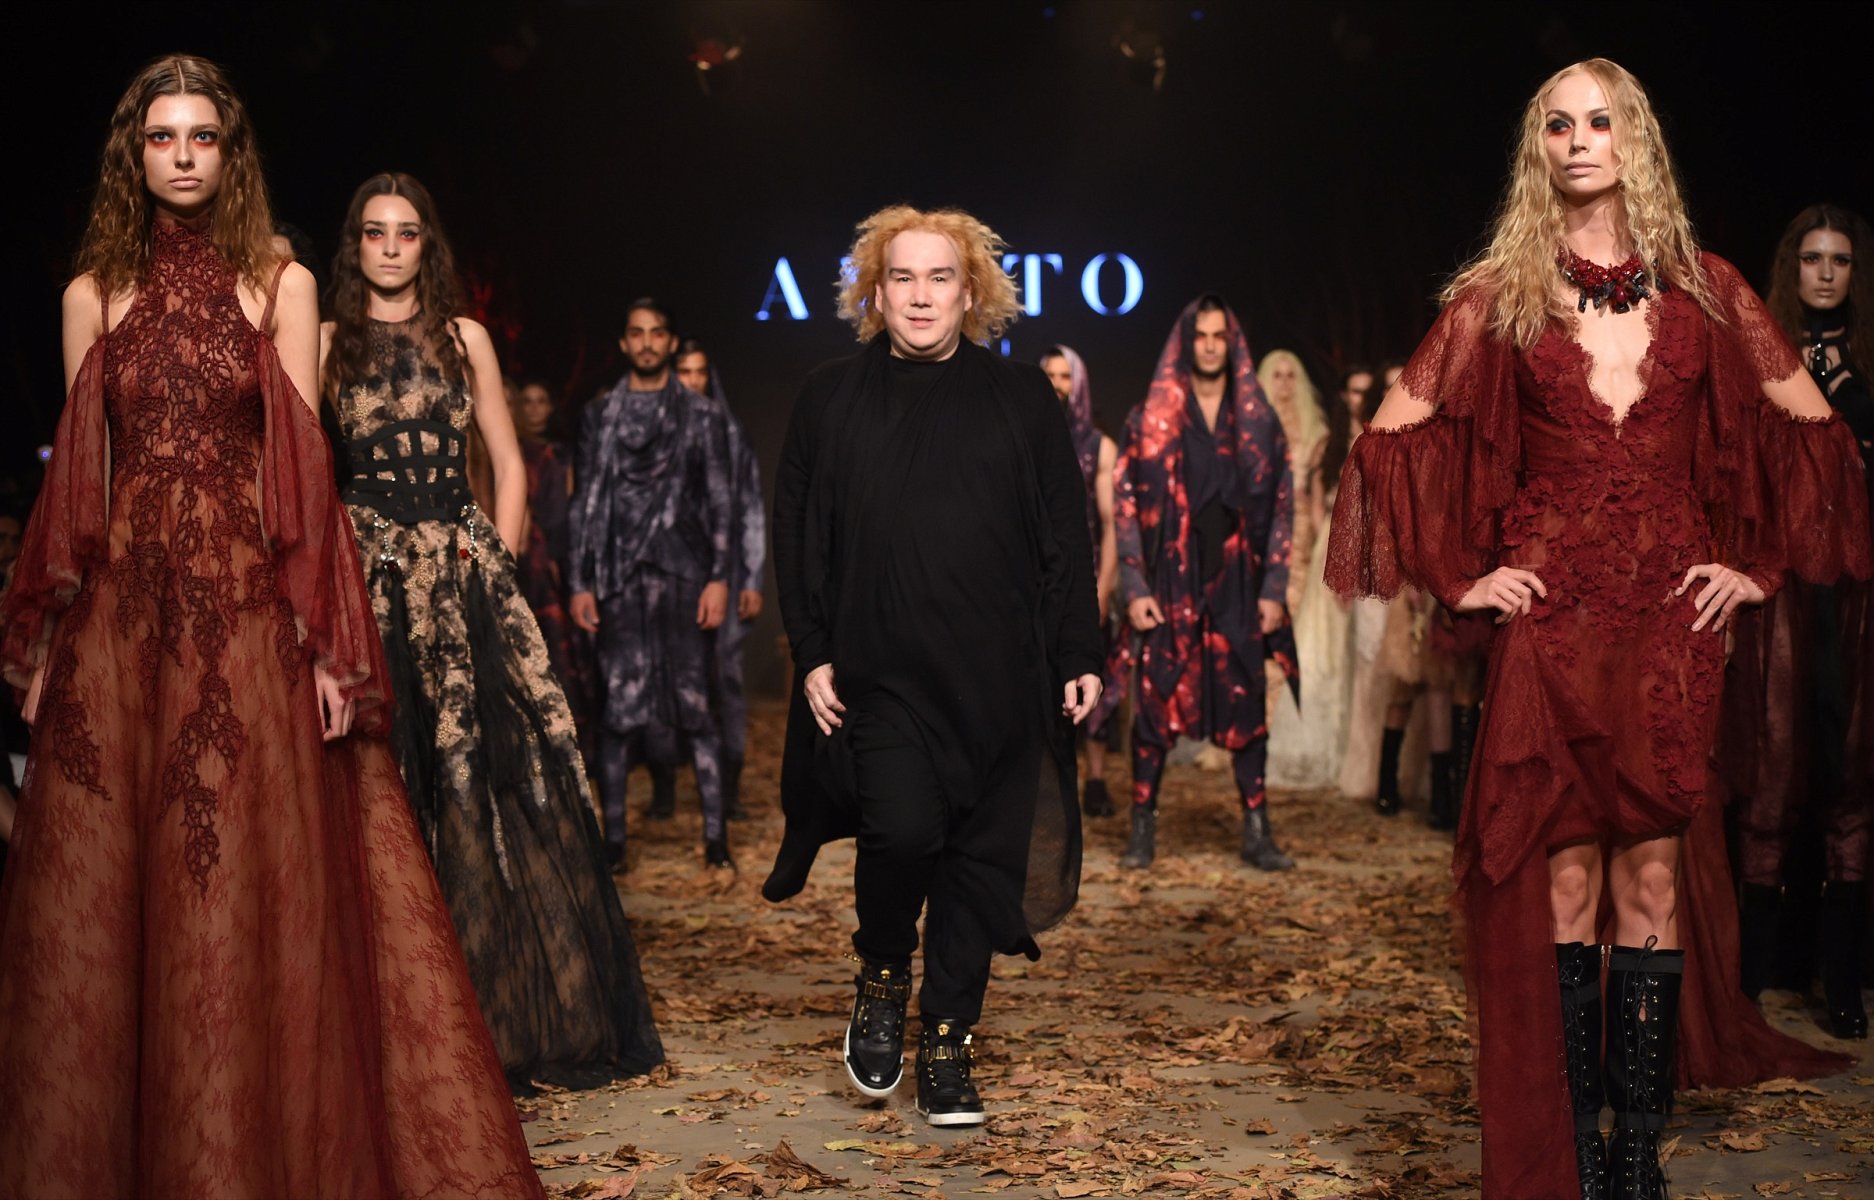 Amato by Furne One Herbst/Winter 2016-2017 - Pret-a-porter - 1